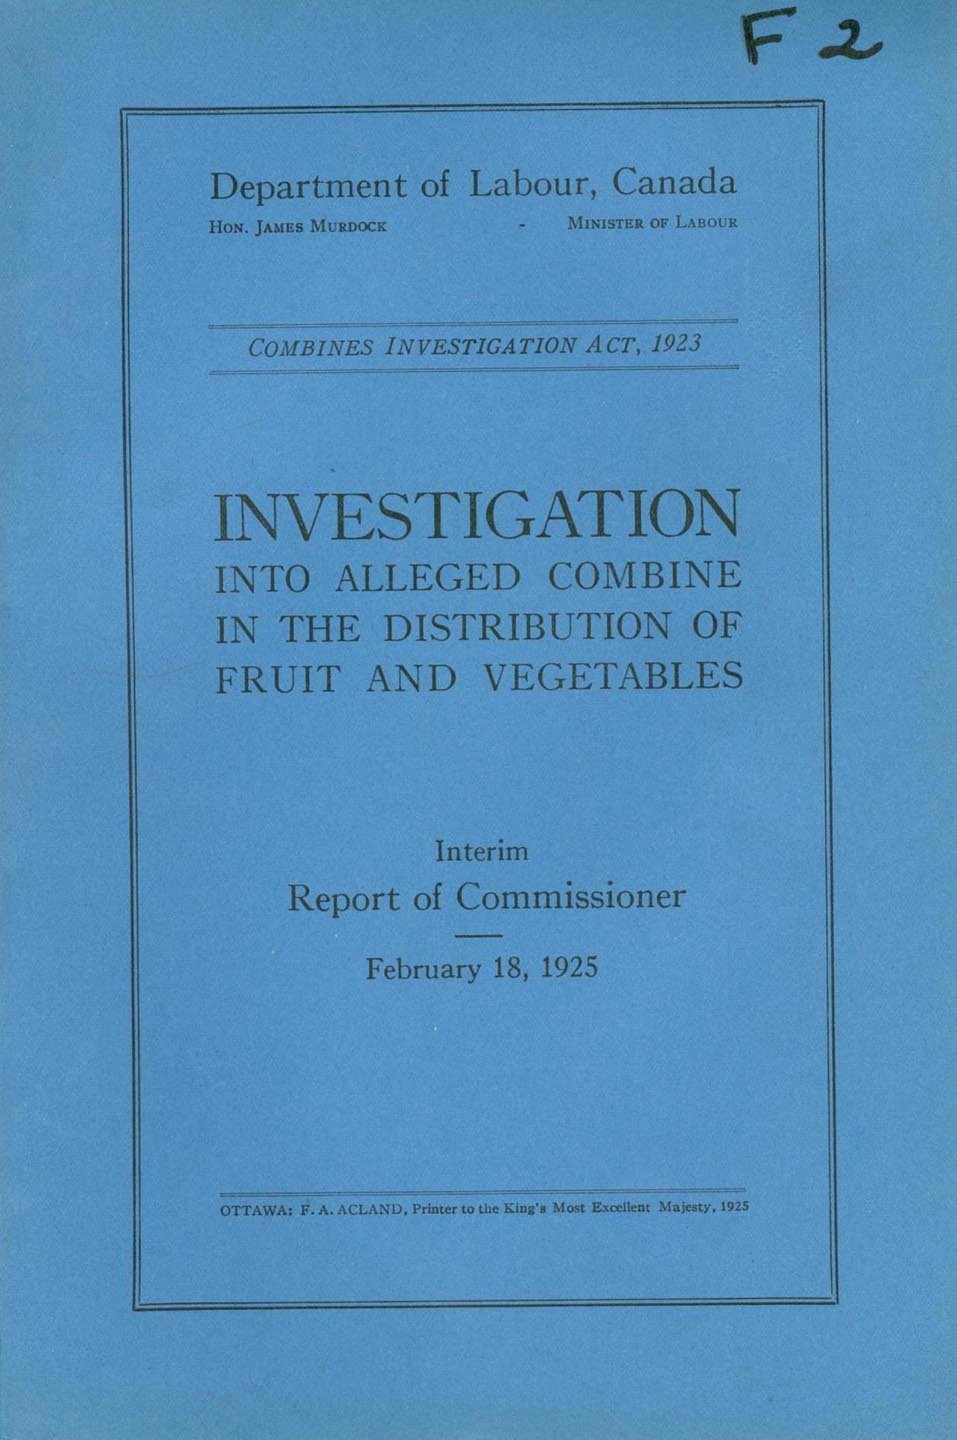 Investigation into Alleged Combine in the Distribution of Fruit and Vegetables